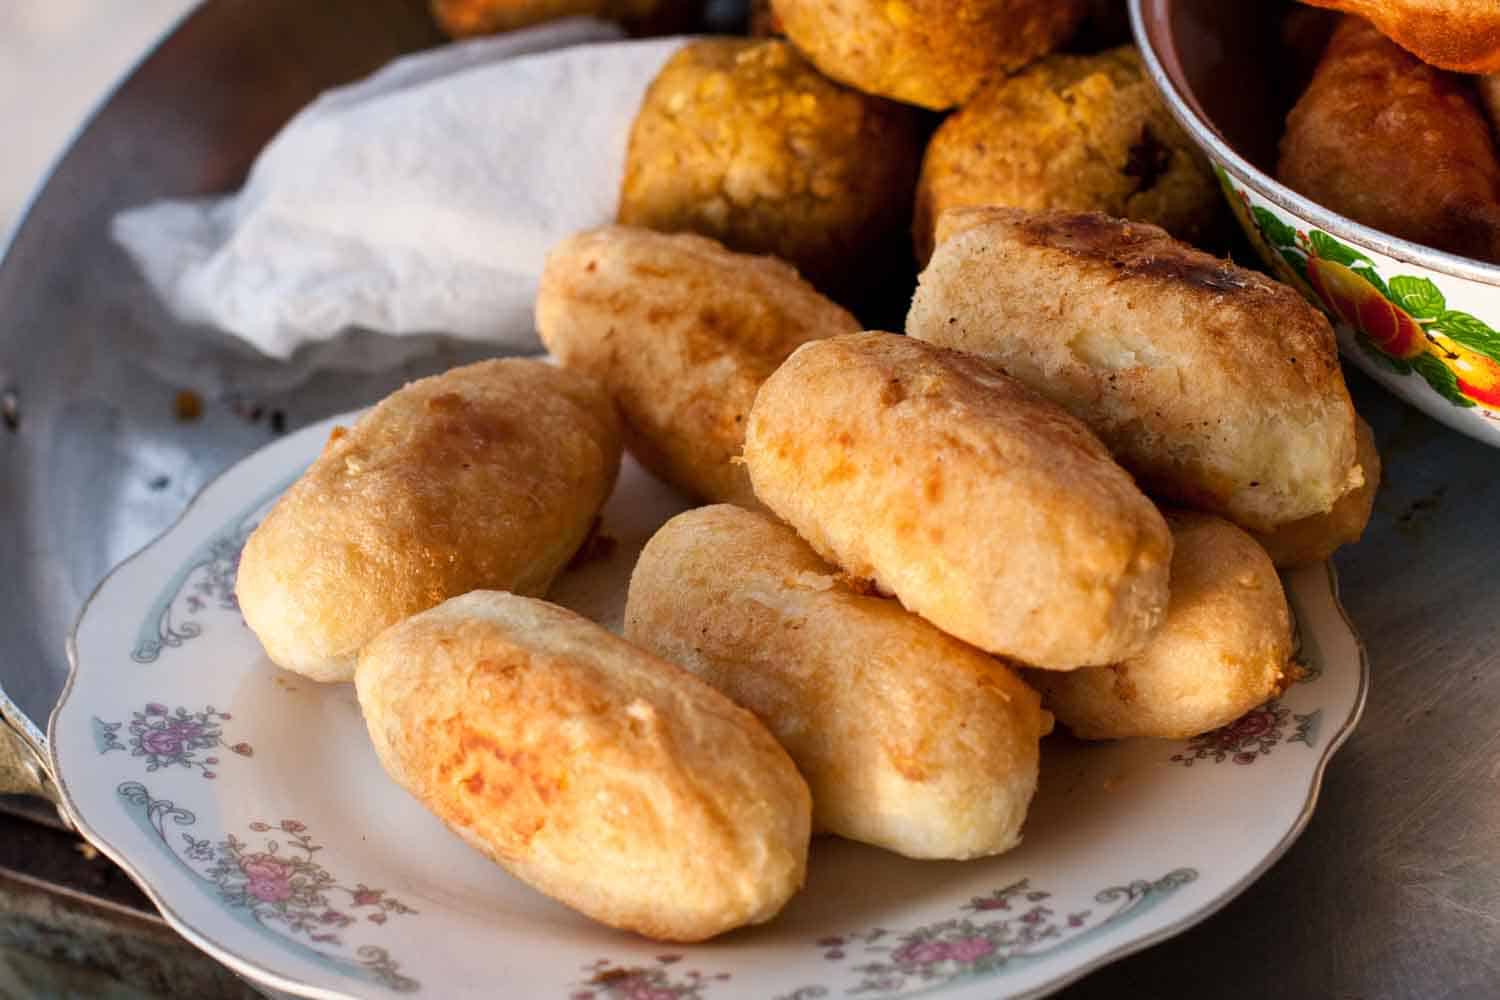 Traditional Panama snack, carimañolas are mashed yucca then stuffed and deep fried.